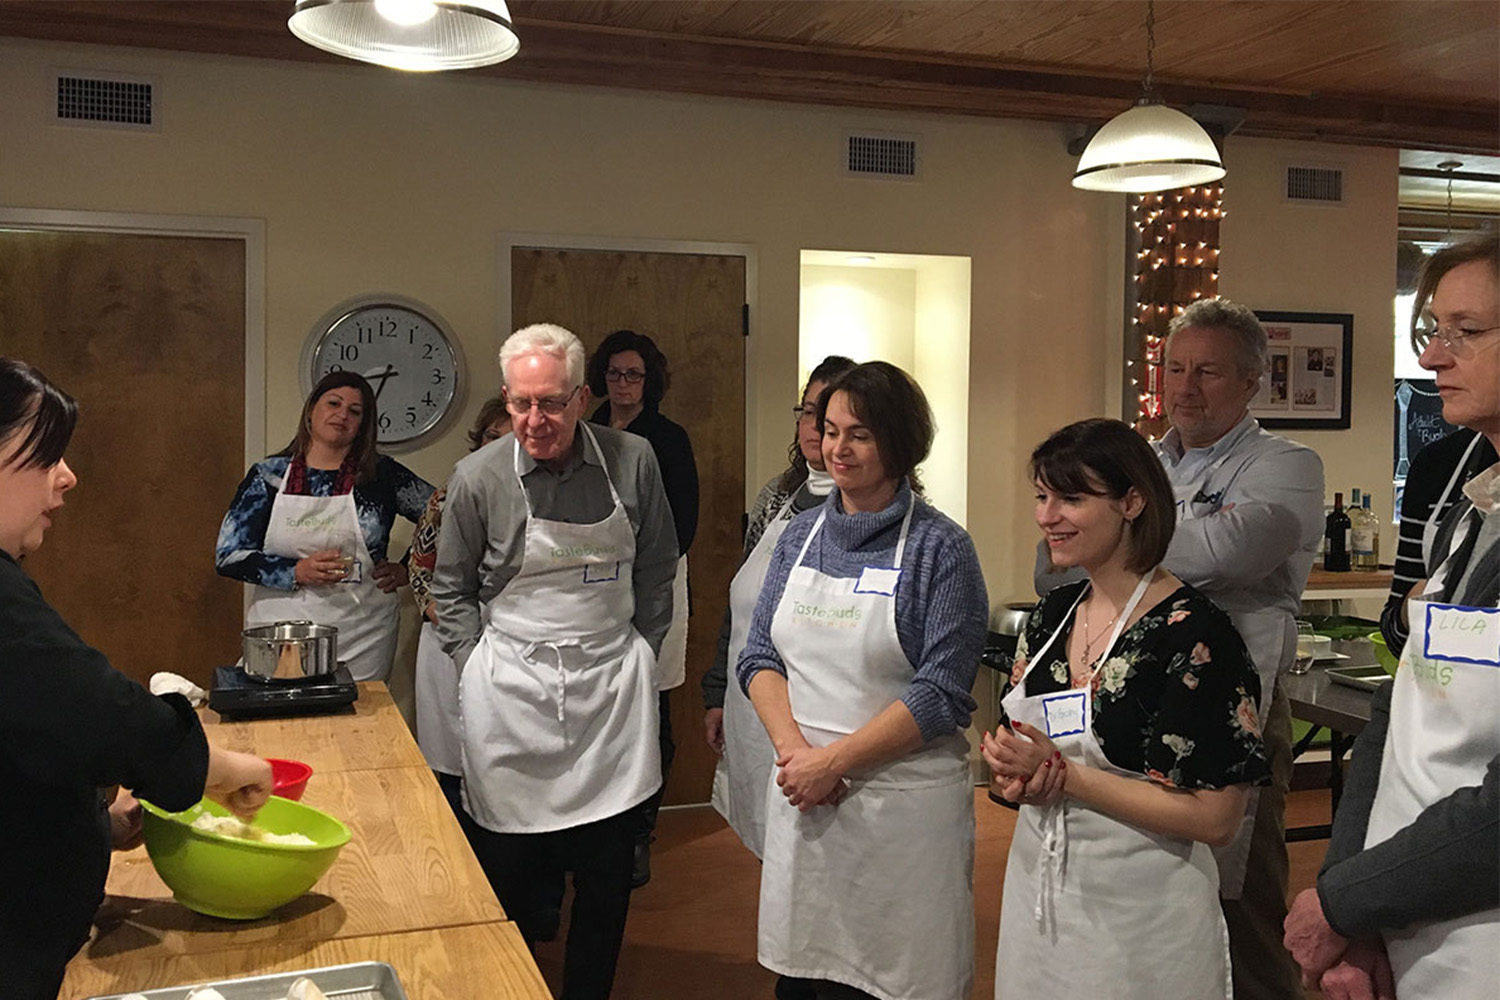 John Tocci, Lila Tocci, and other staff members gather around an instructor teaching the group how to make pasta